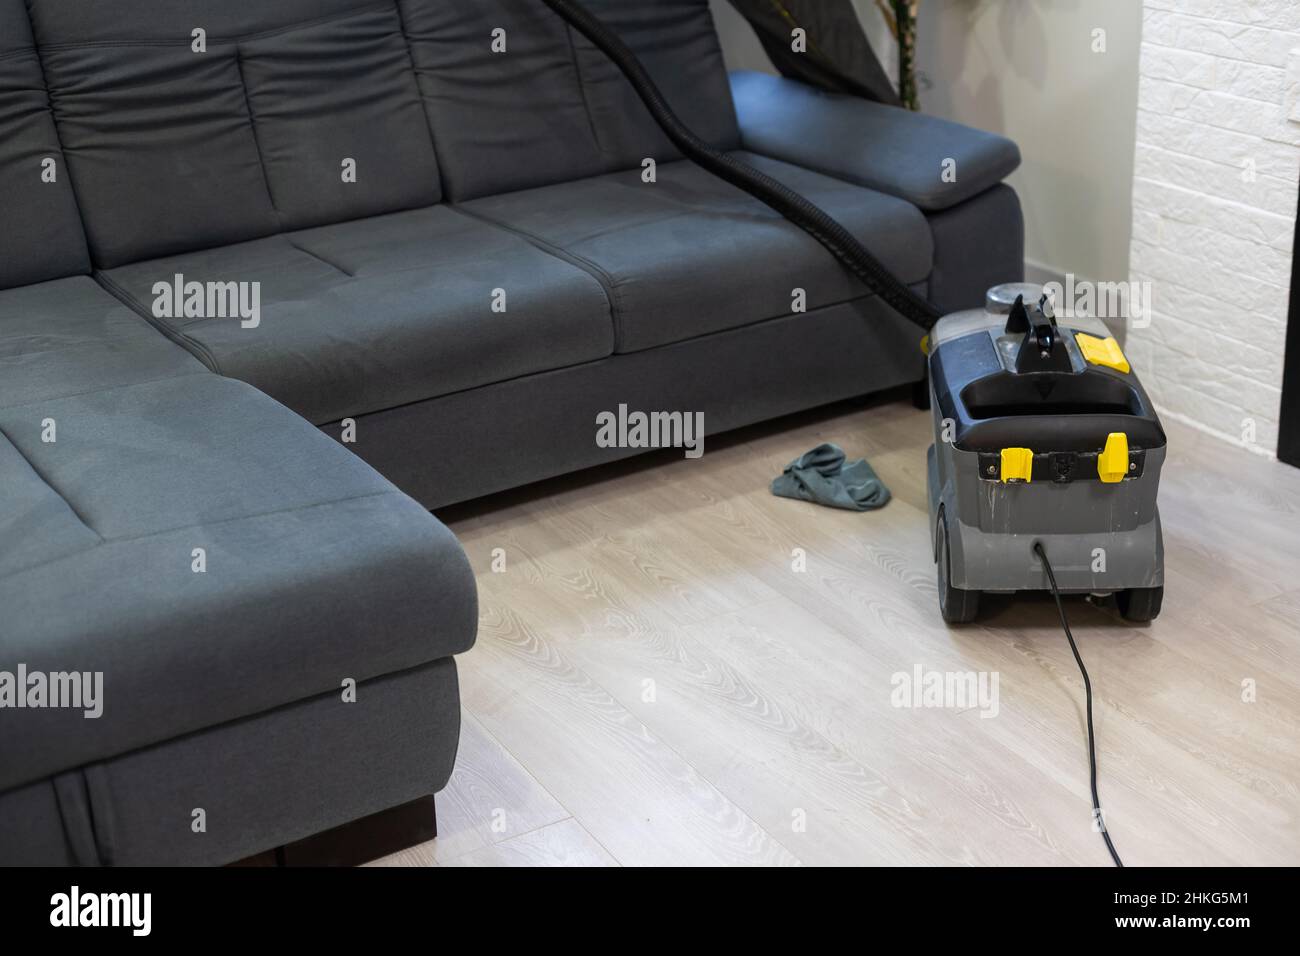 Hand cleaning a sofa with a steam cleaner, Home cleaning concept Stock  Photo - Alamy